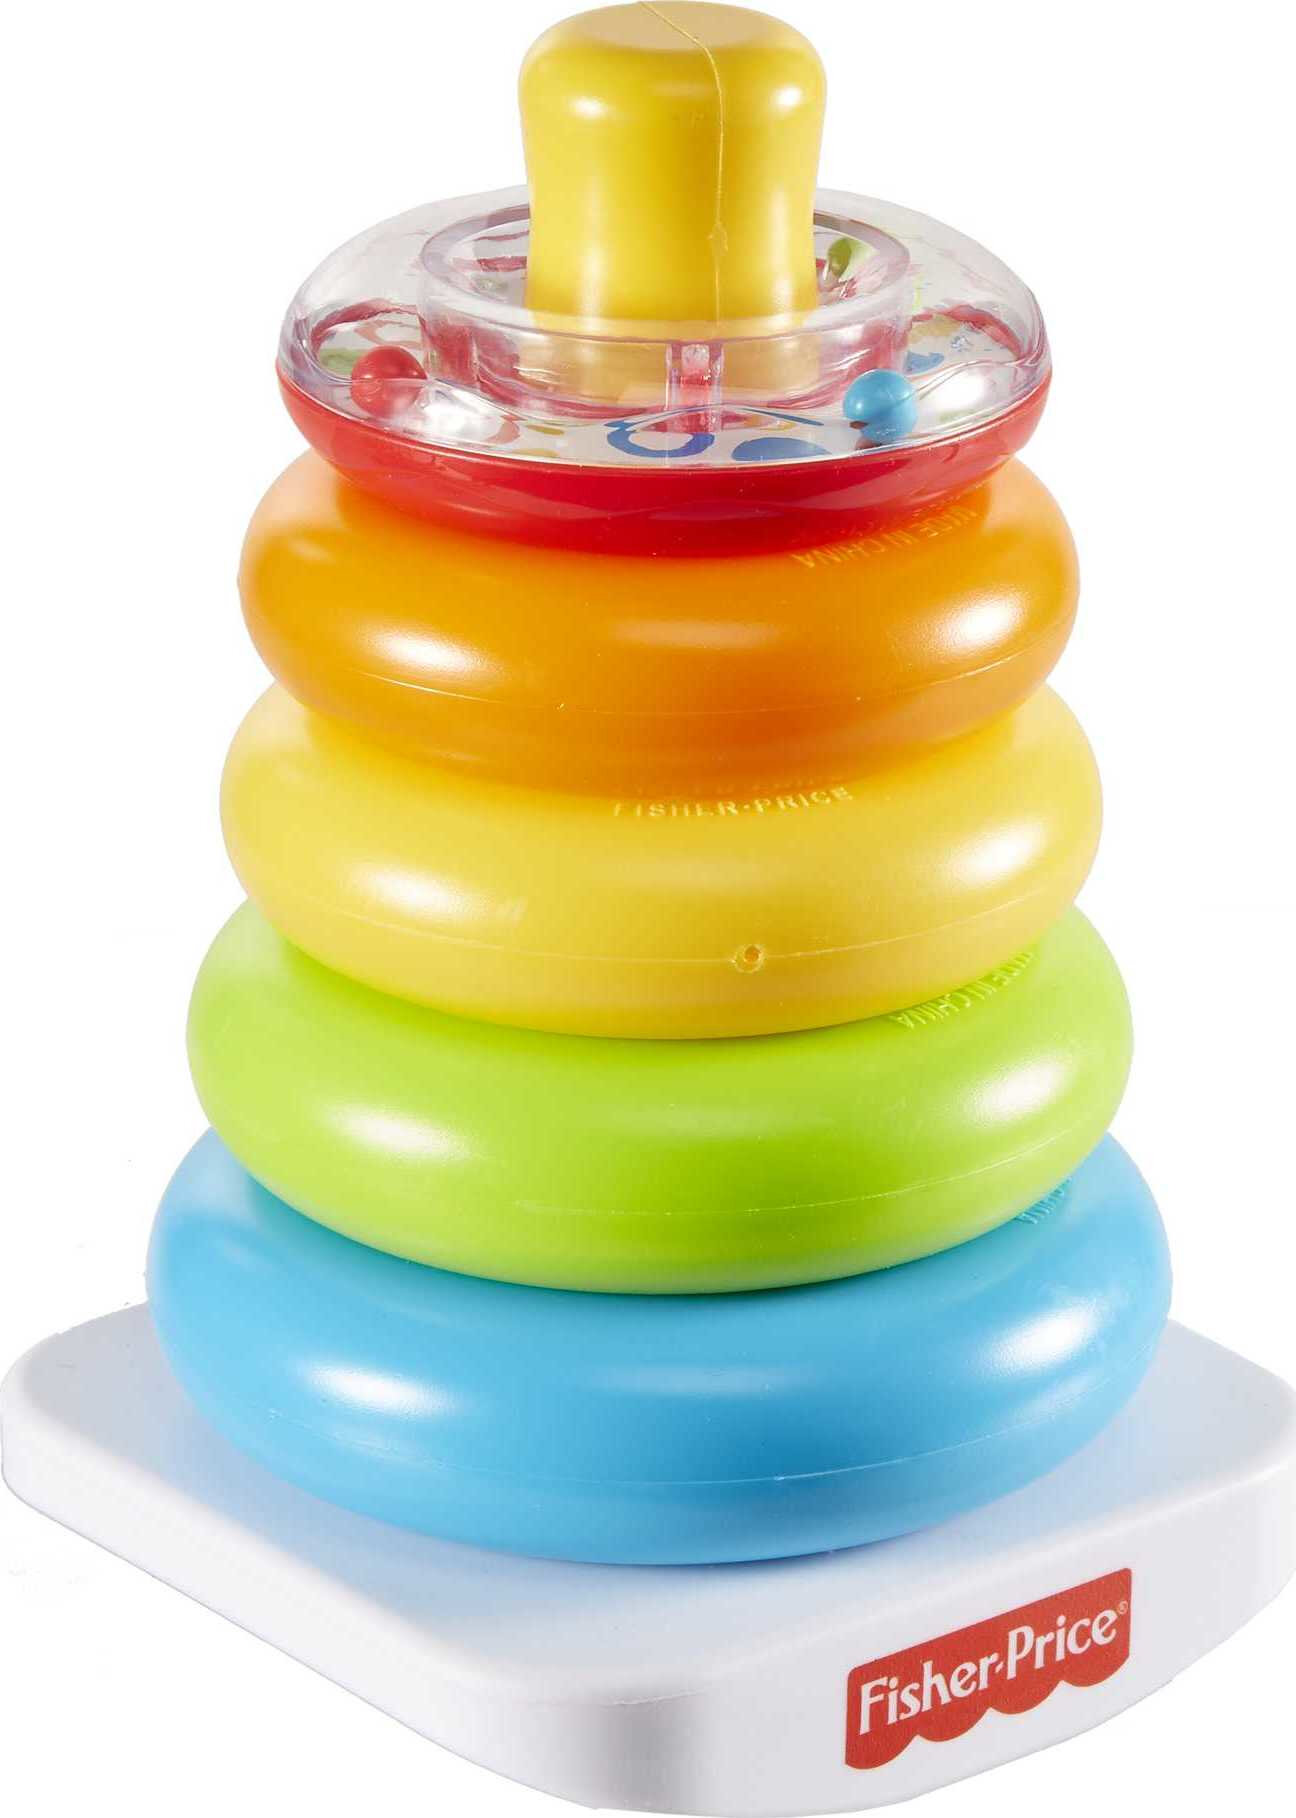 Fisher-Price Rock-a-Stack Ring Stacking Toy with Roly-Poly Base for Infants - image 1 of 6